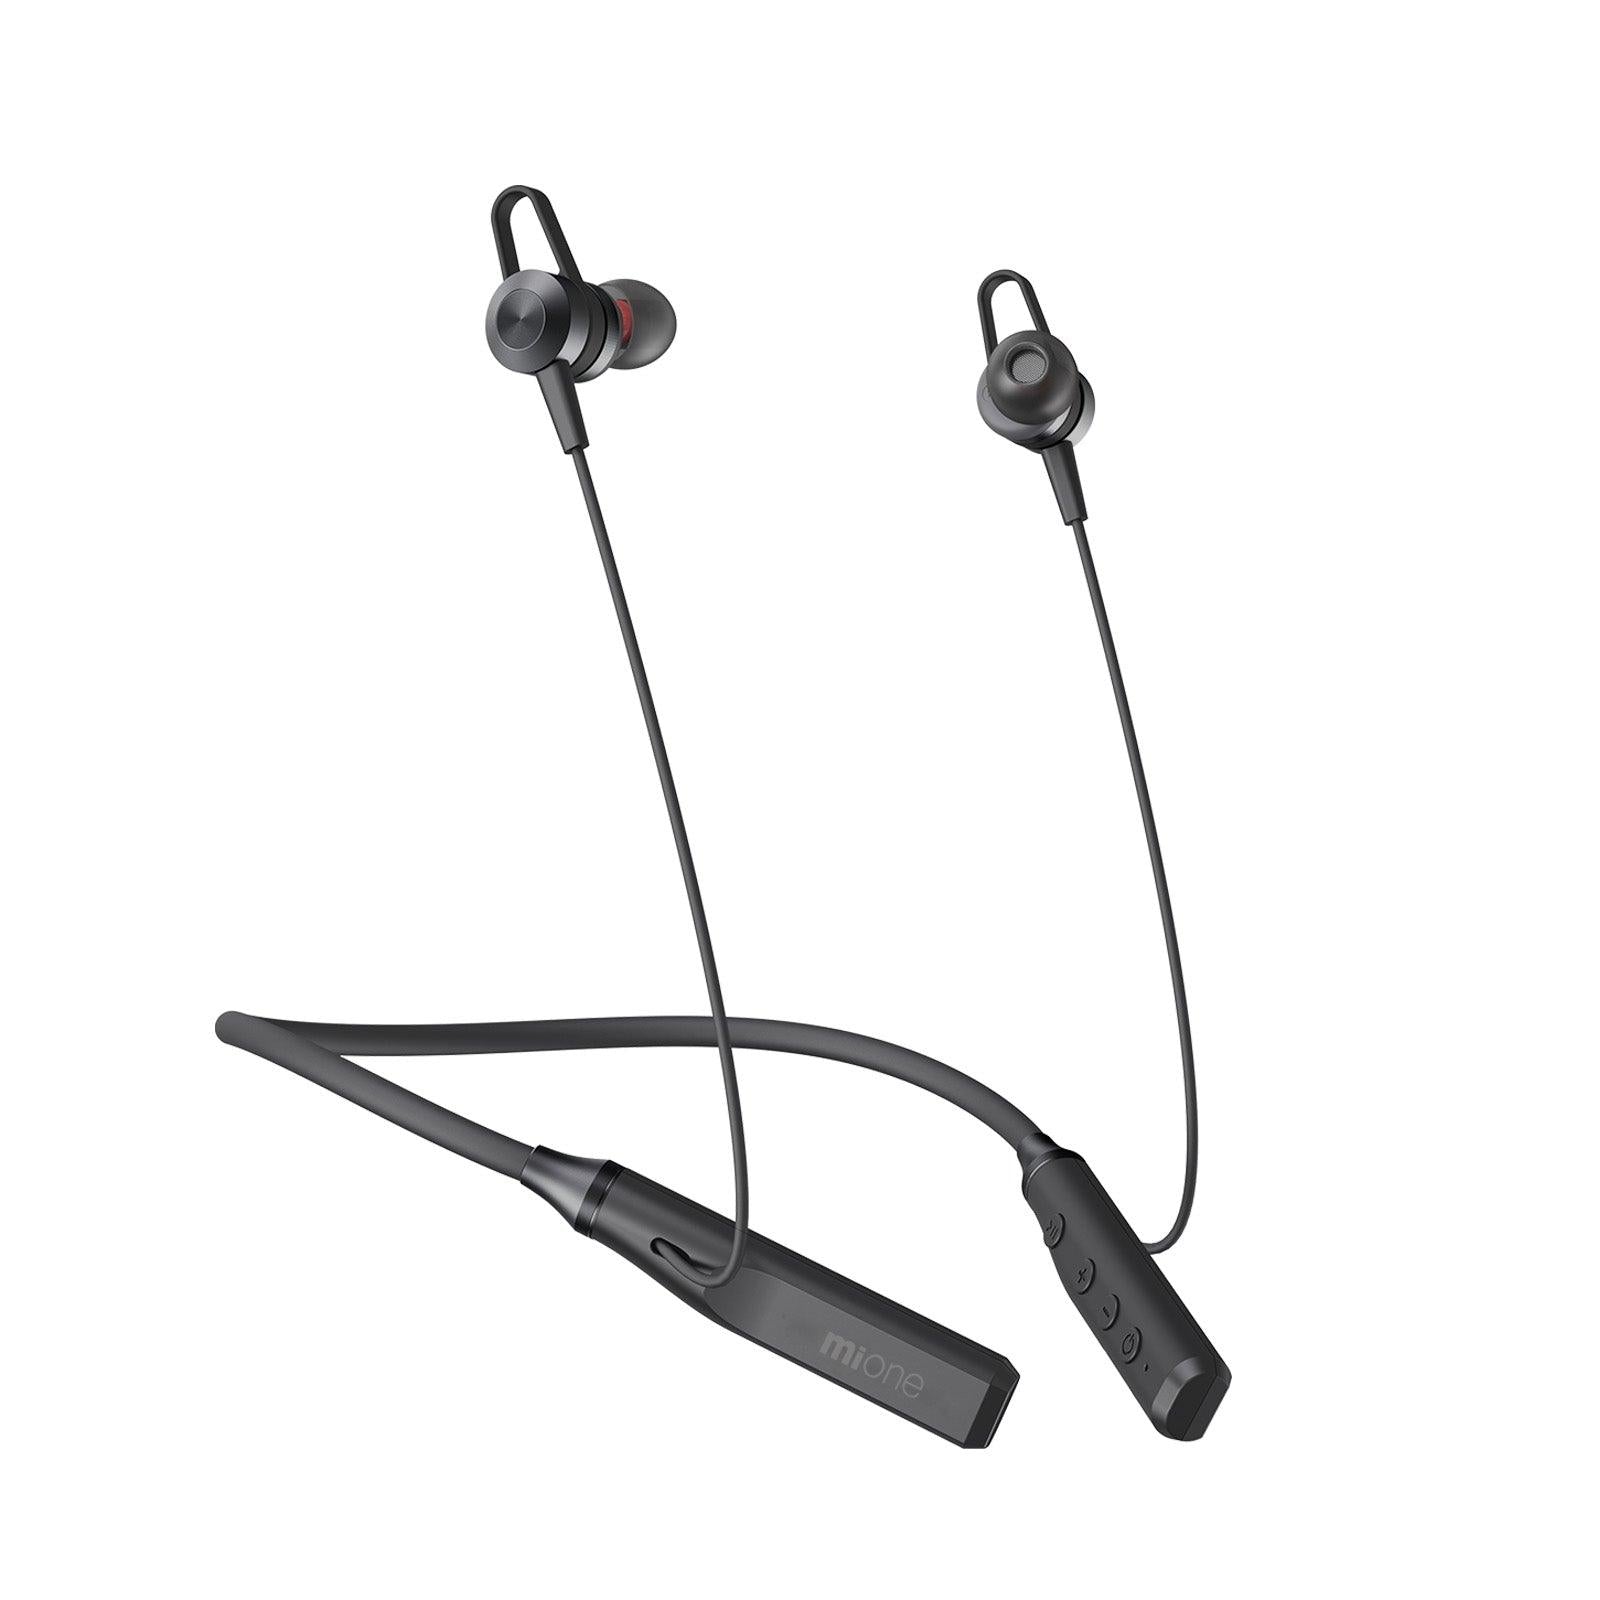 Mione MiA10 Active Noise Cancellation Wireless Bluetooth headset